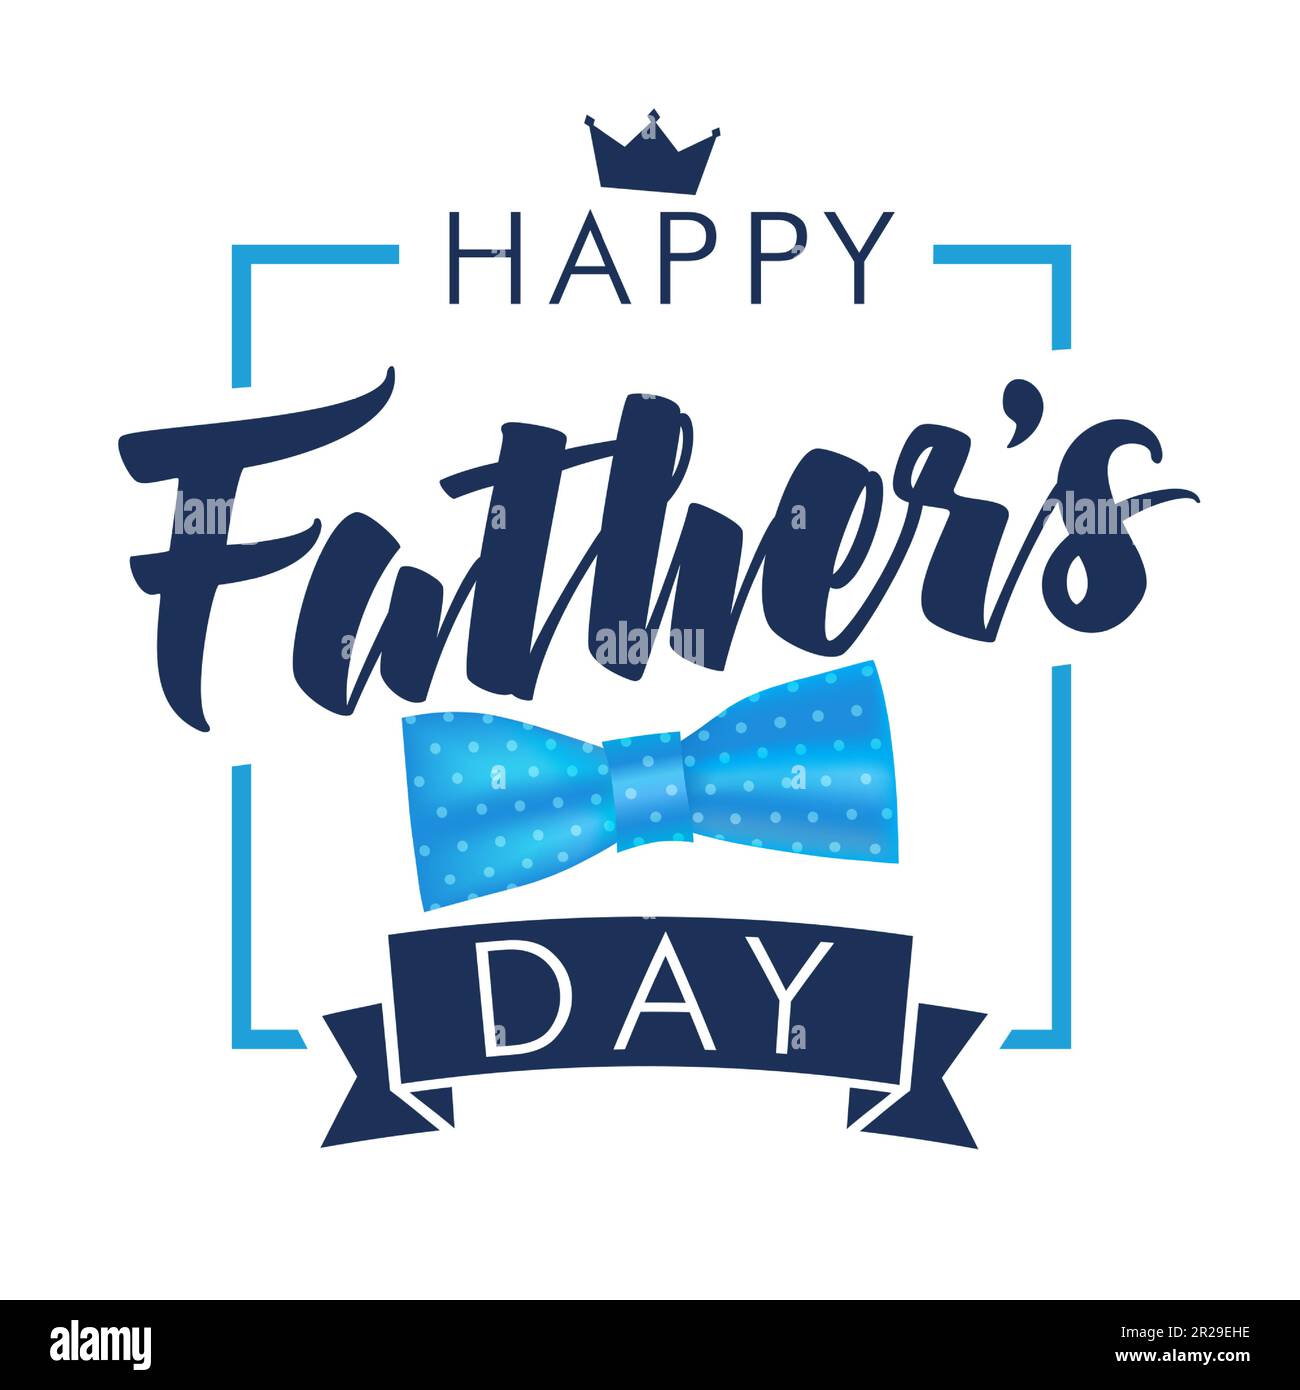 614,874 Fathers Day Images, Stock Photos, 3D objects, & Vectors